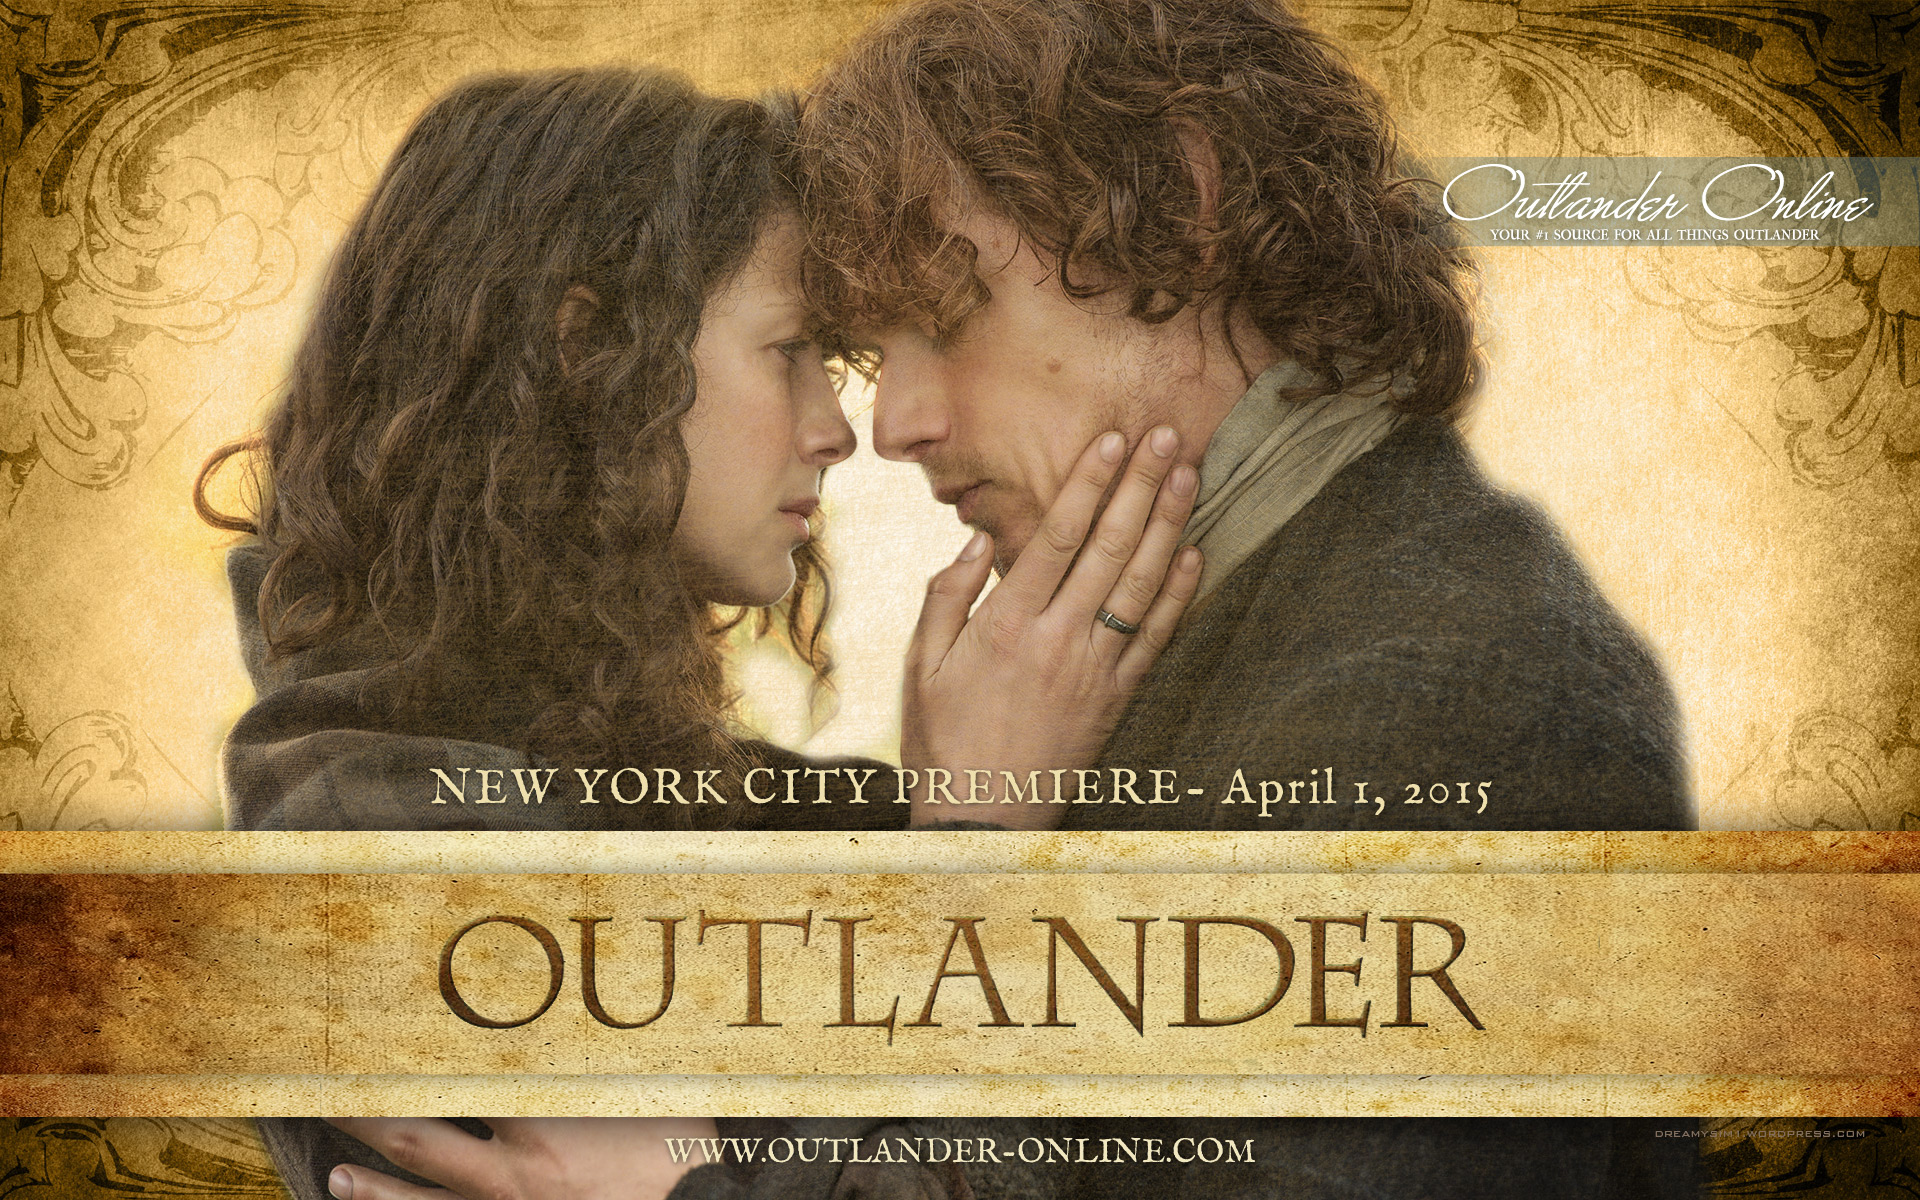 Outlander New York Premiere Poster In My Dreams HD Wallpapers Download Free Map Images Wallpaper [wallpaper376.blogspot.com]